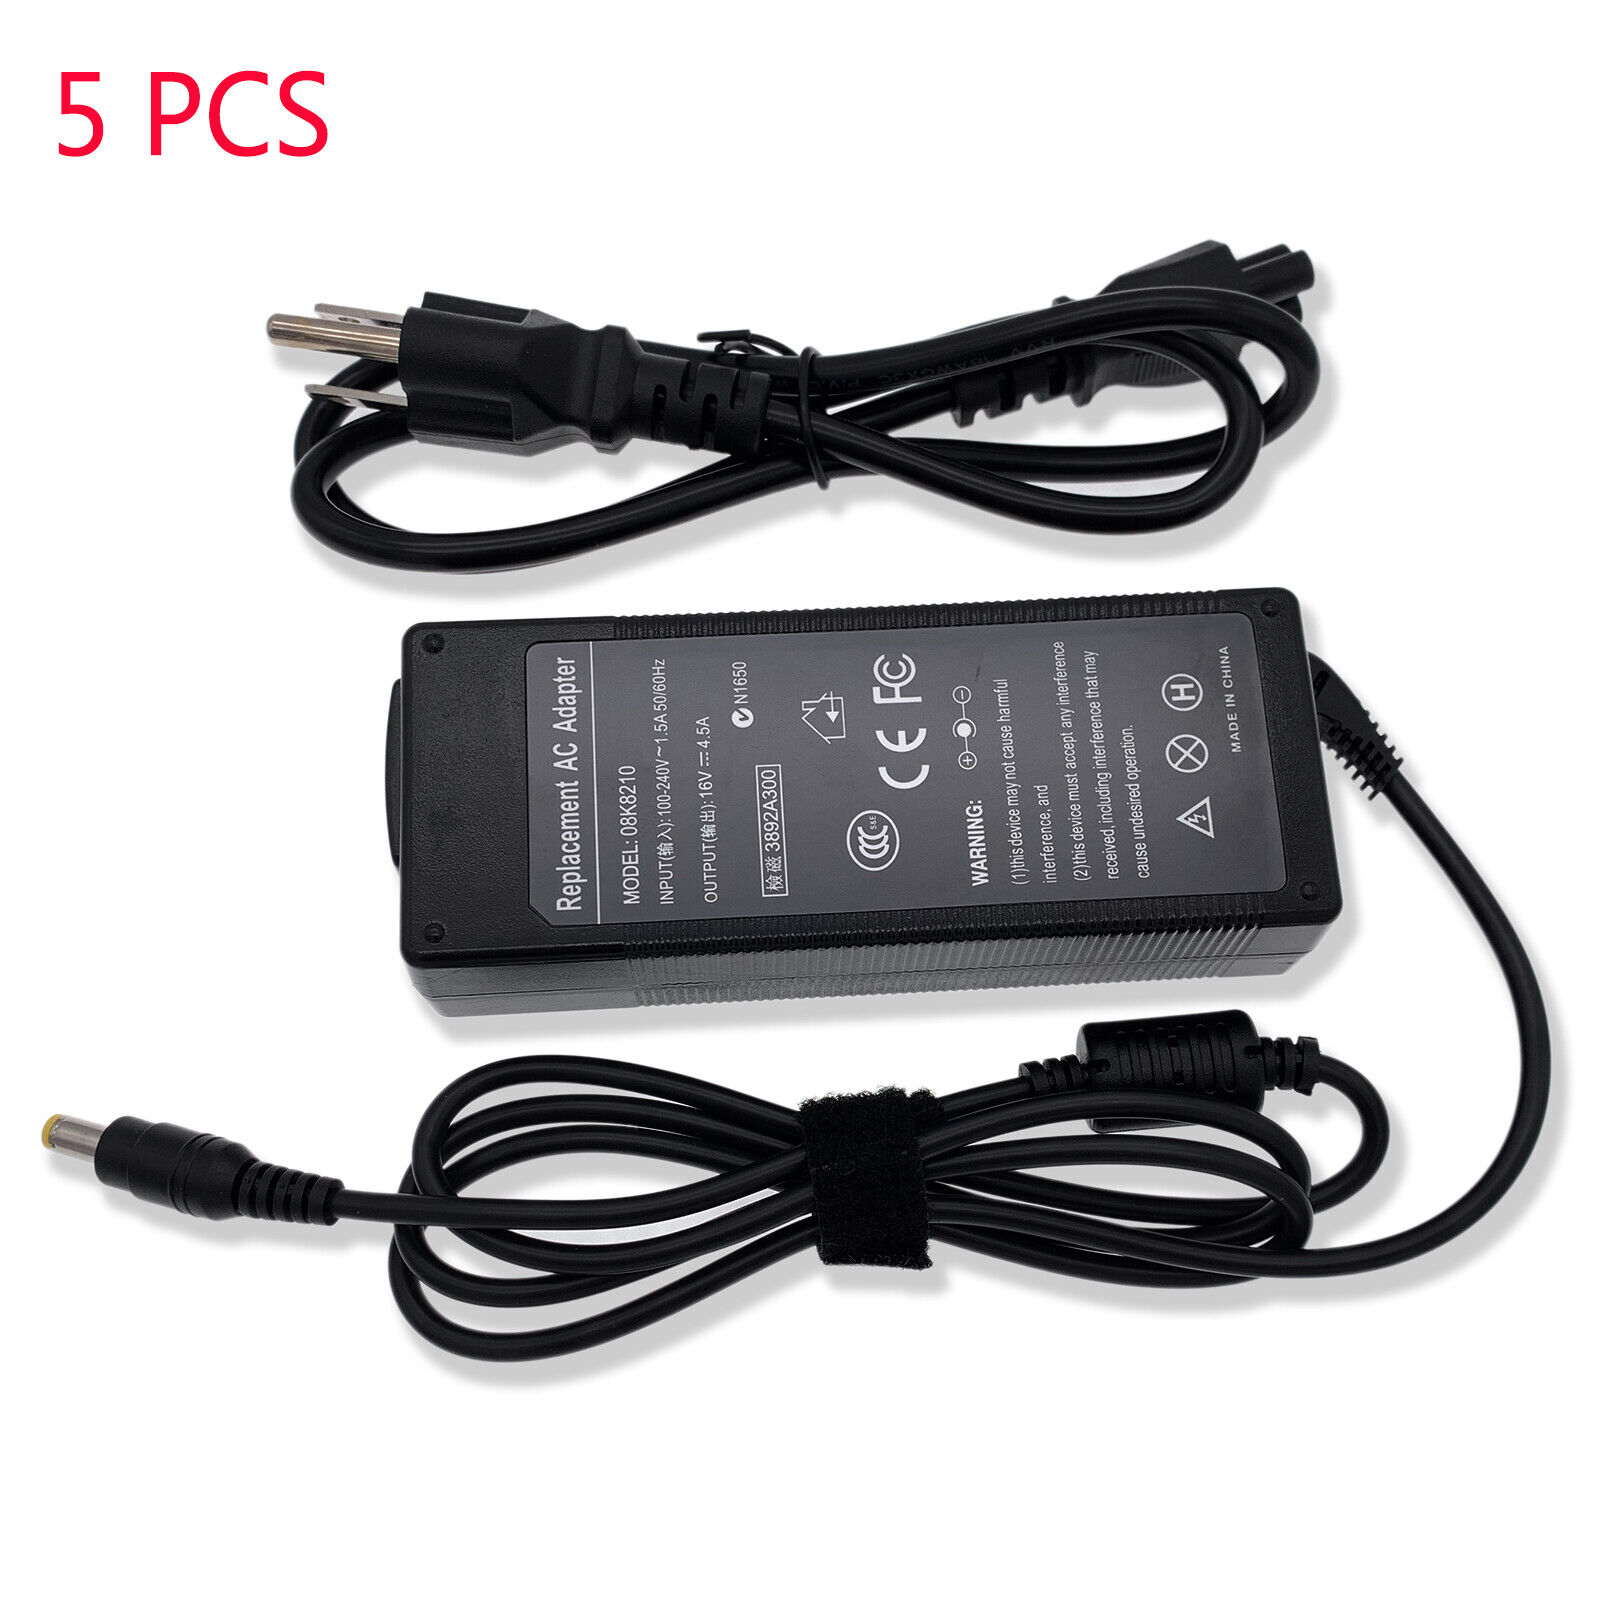 5Pcs AC Adapter For Panasonic ToughBook CF18 CF19 CF29 Charger Power Supply Cord